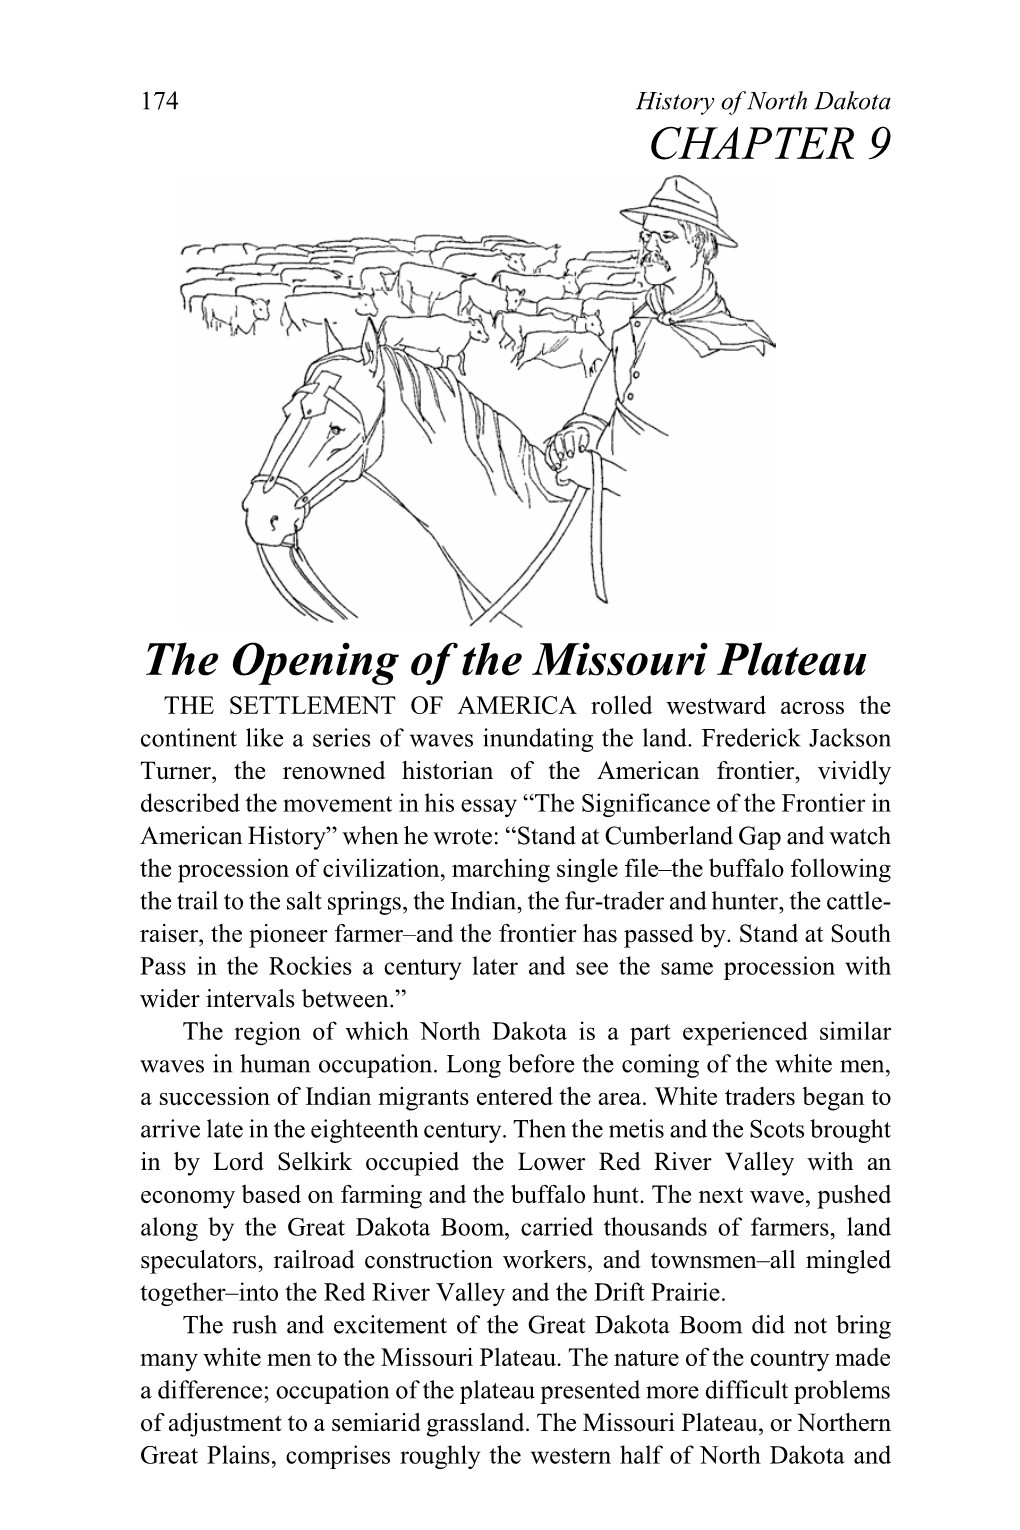 CHAPTER 9 the Opening of the Missouri Plateau